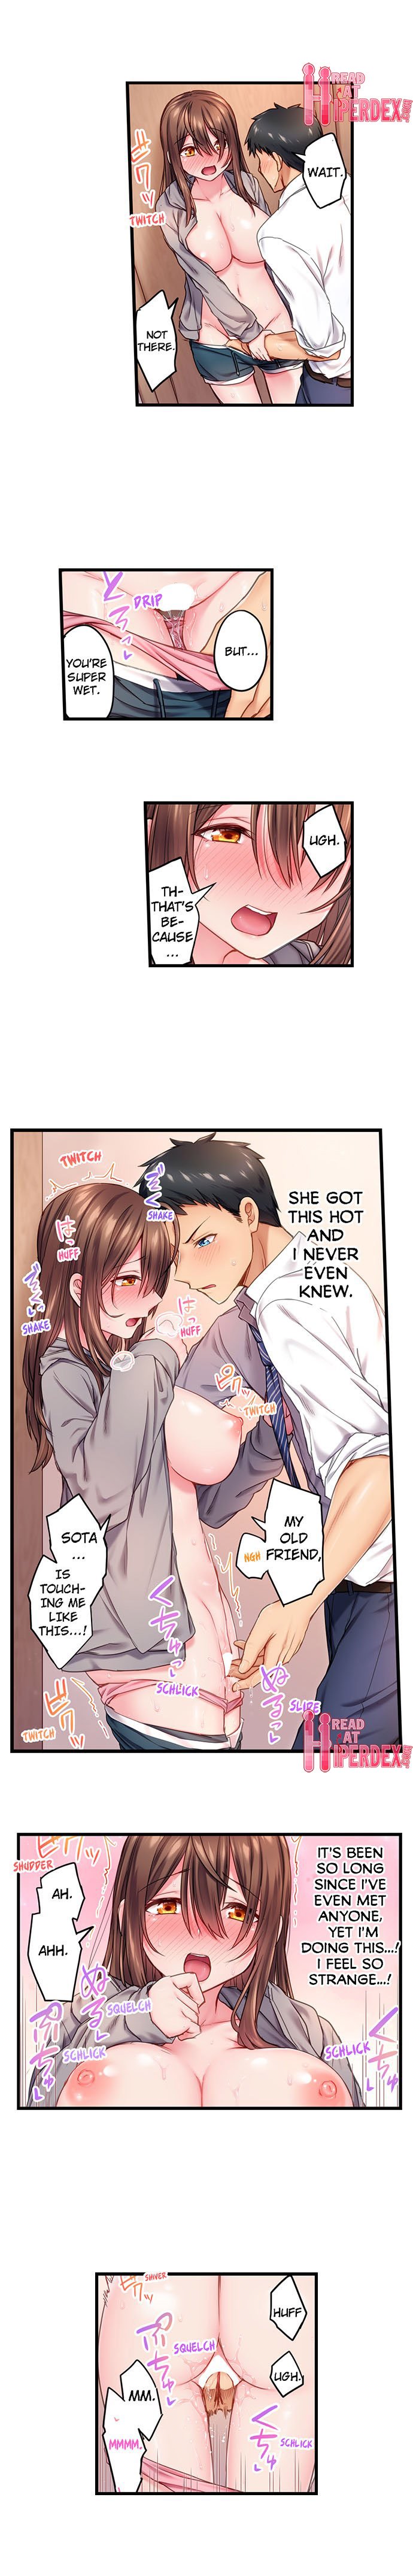 cant-believe-my-loner-childhood-friend-became-this-sexy-girl-chap-3-3